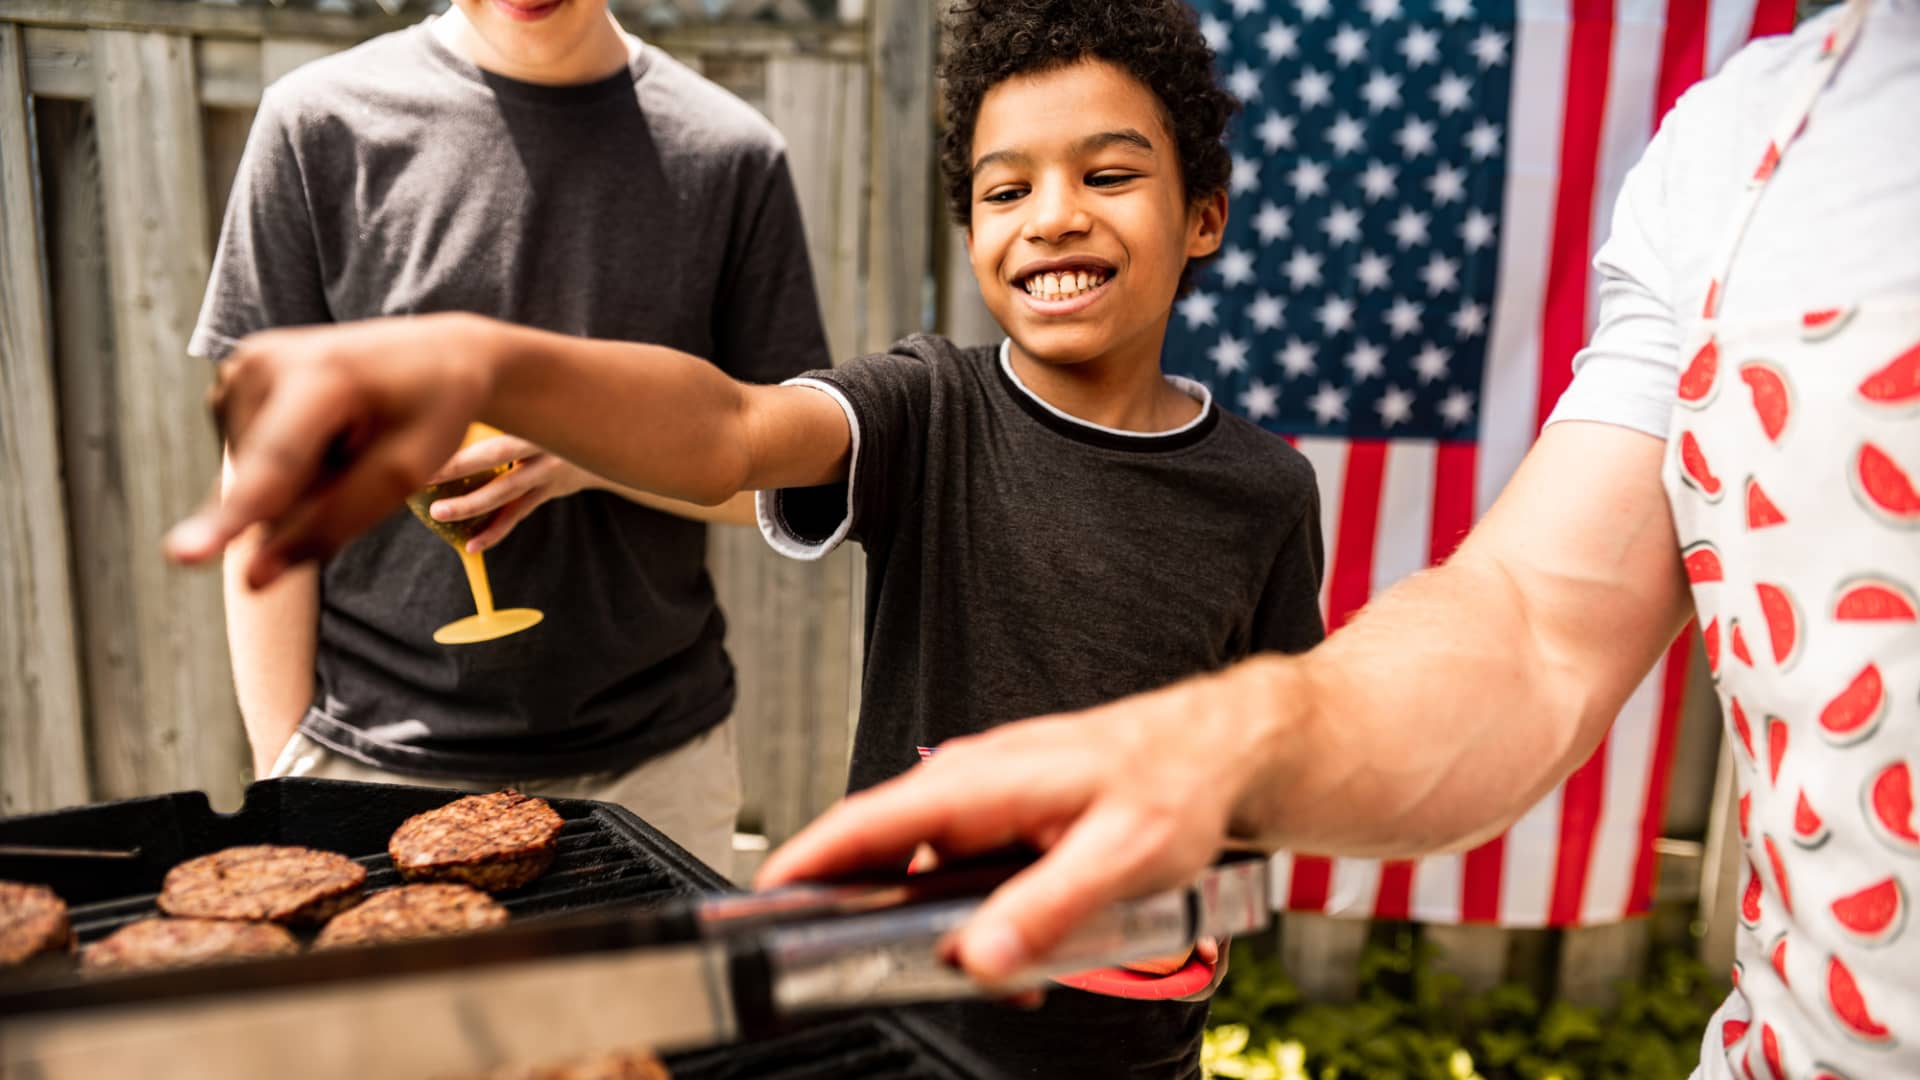 Inflation is dampening July 4 fun. How to save on a holiday barbecue